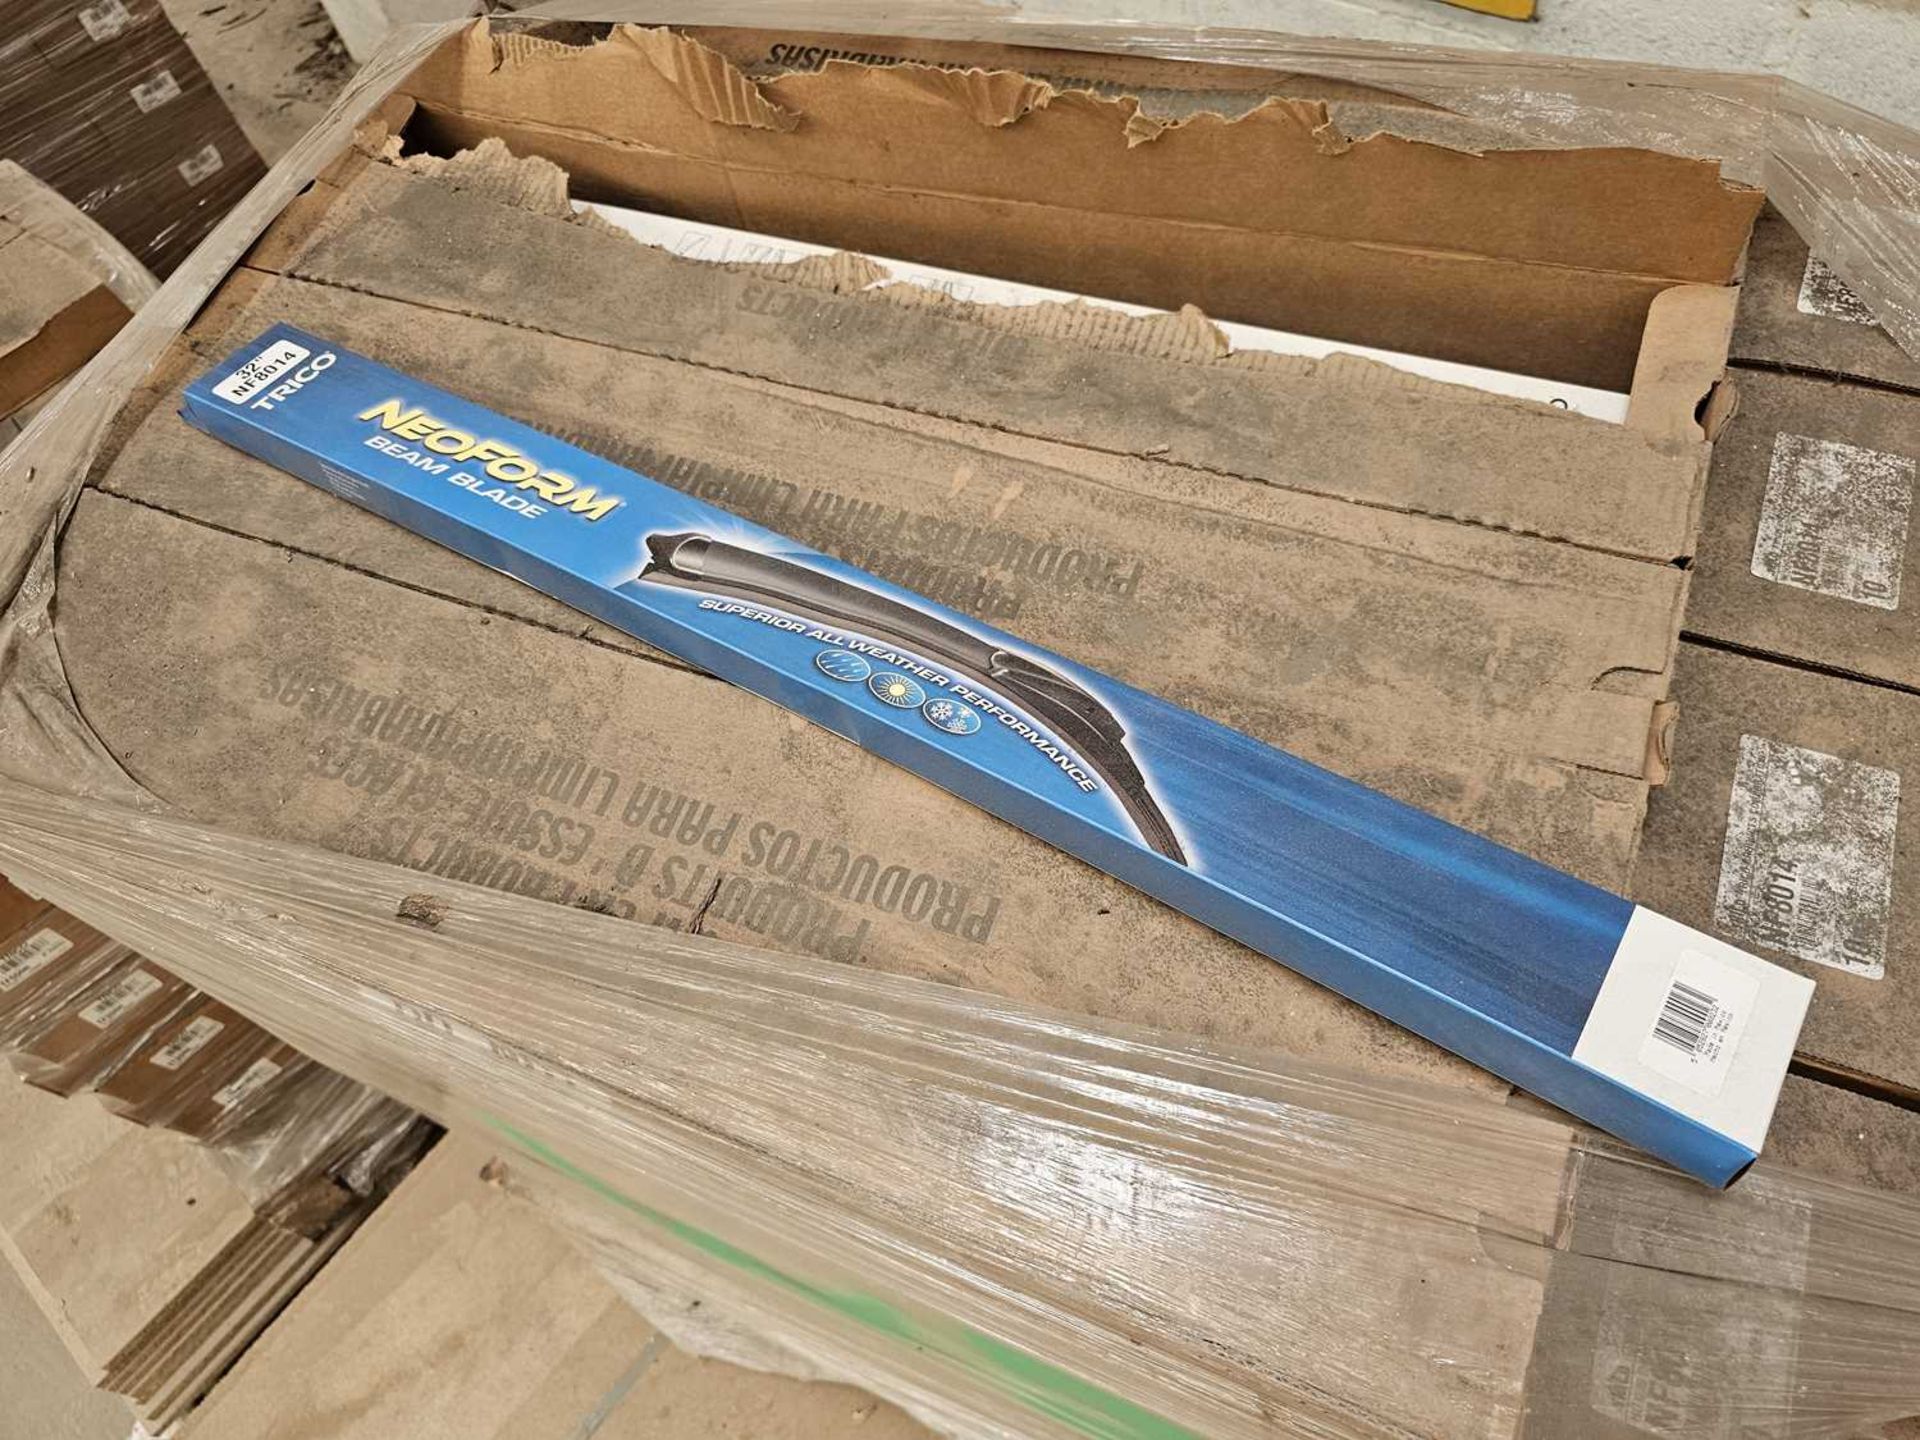 Unused Pallet of Trico NF8014 Windscreen Wipers (32")